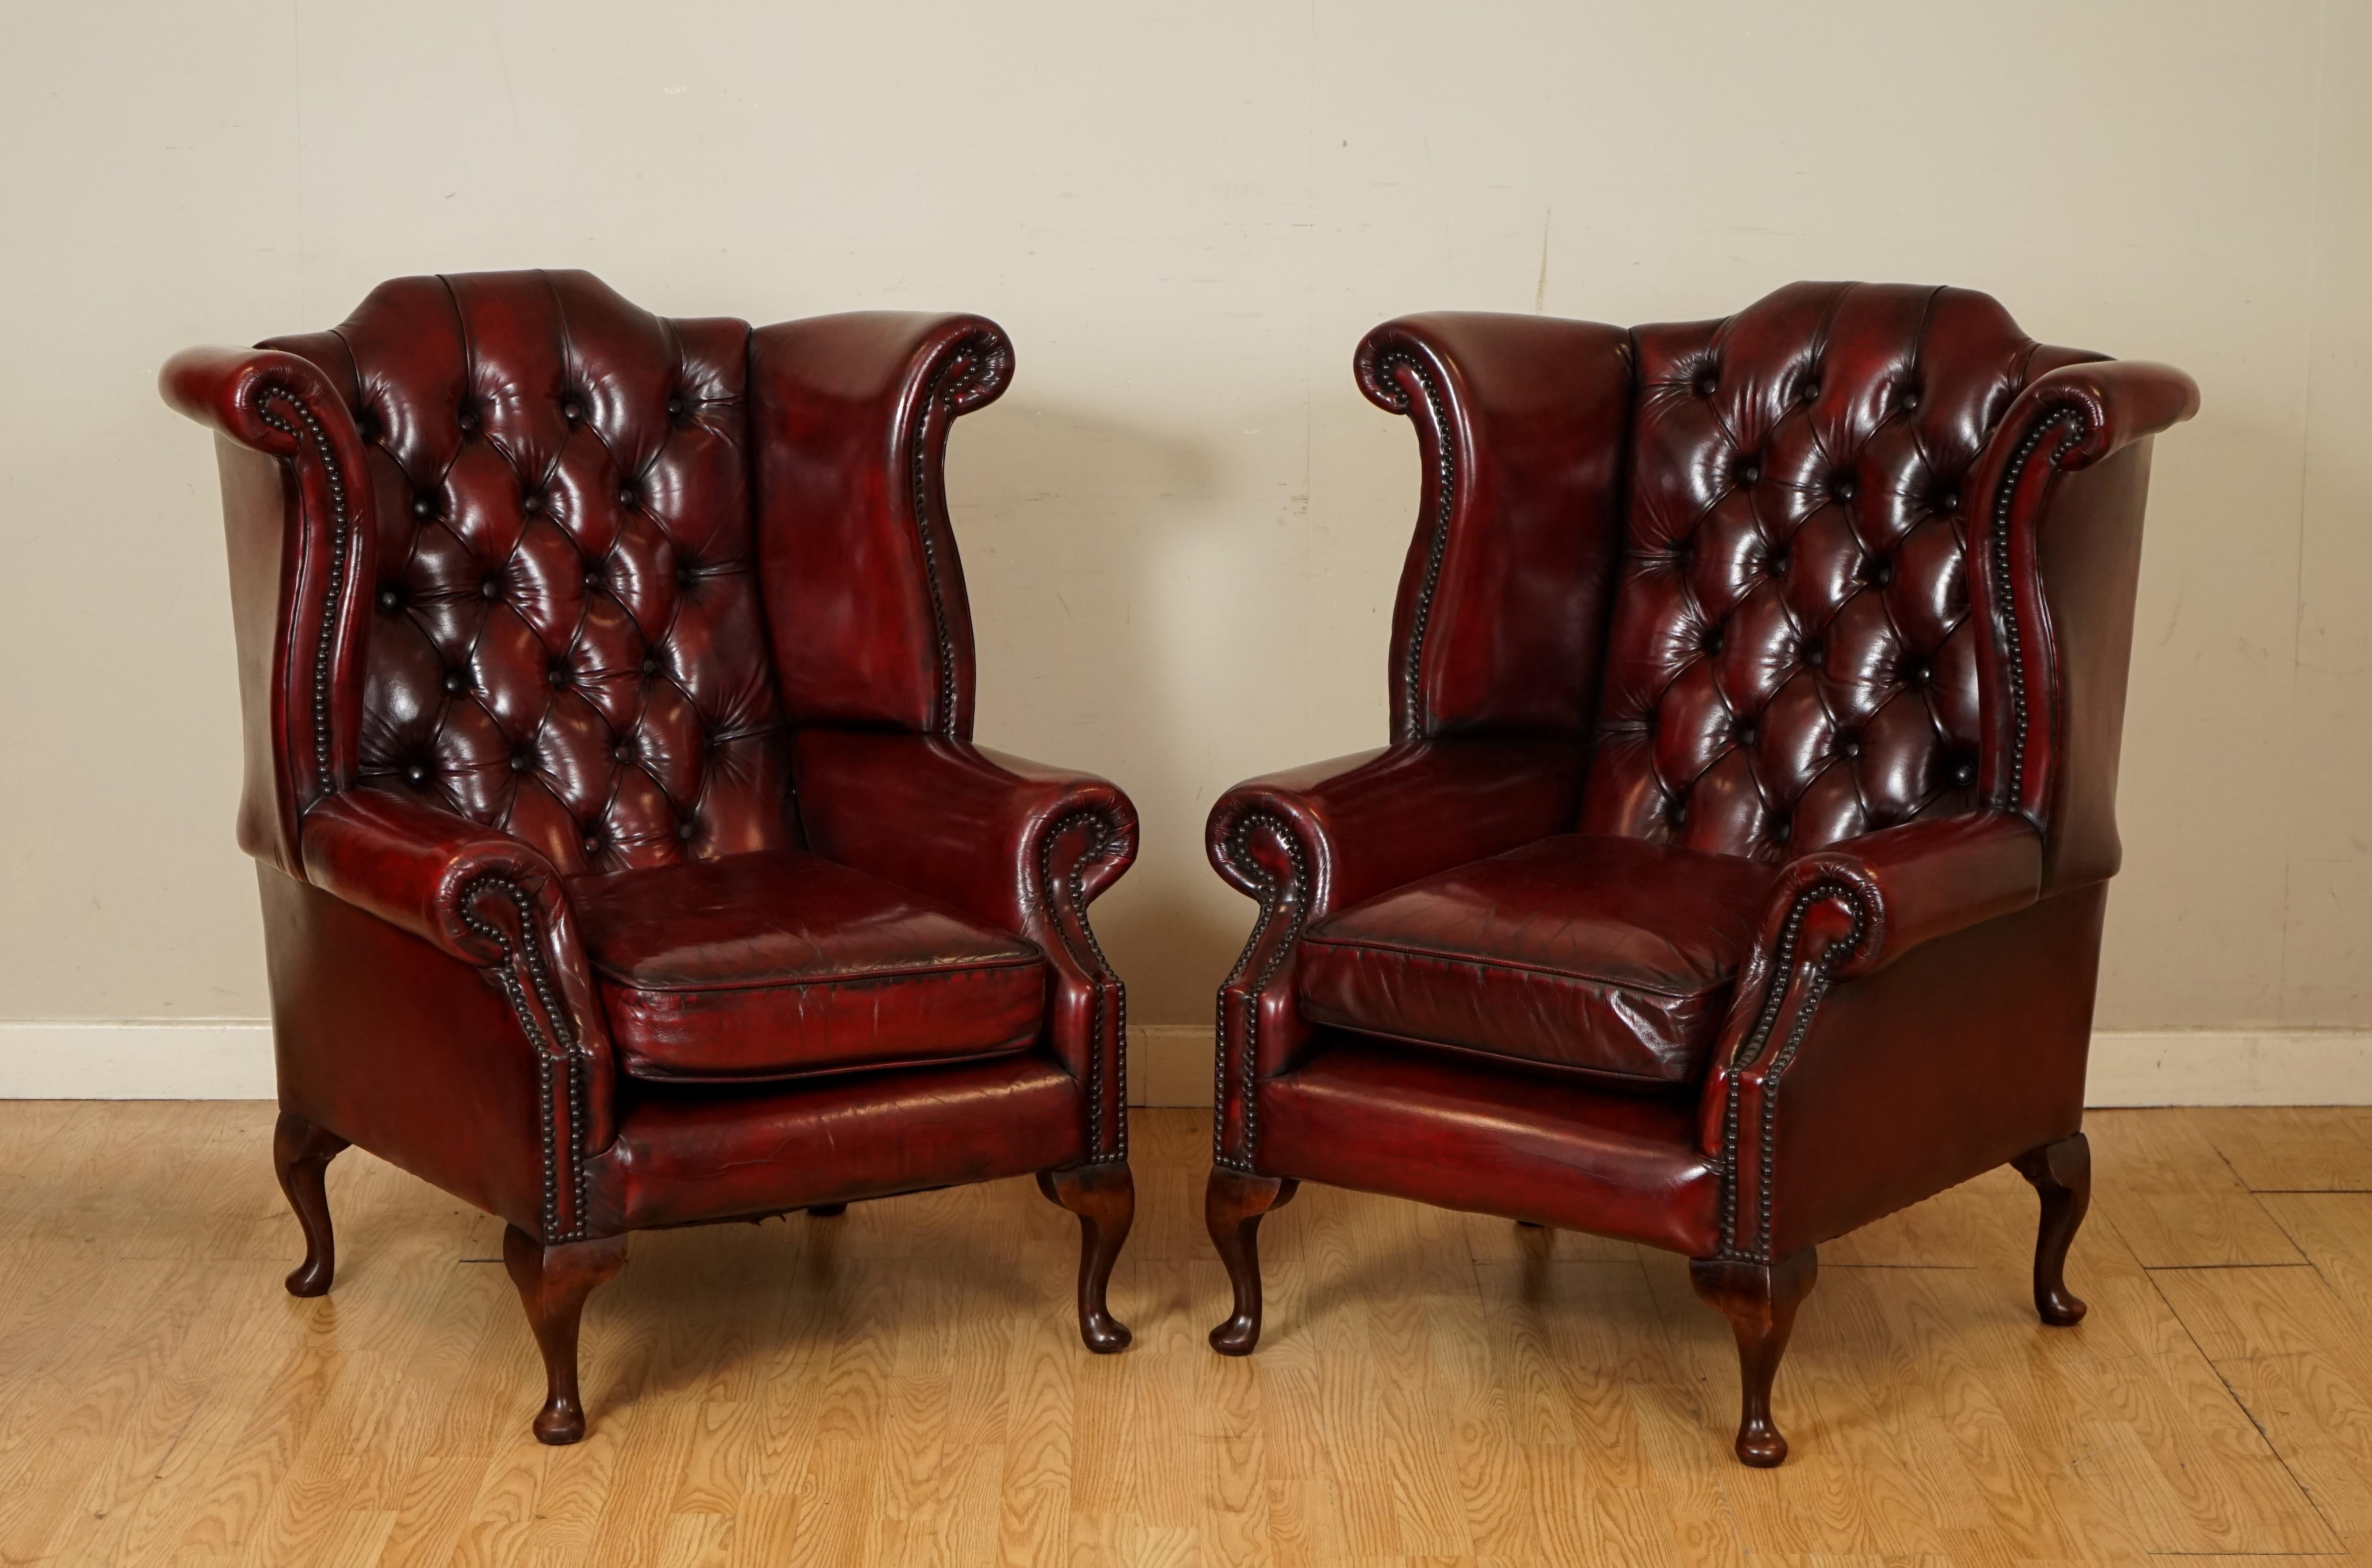 Burgundy Leather Wingback Chair - 3 For Sale on 1stDibs | burgundy wingback  chair, burgundy wingback recliner, burgundy wing back chair